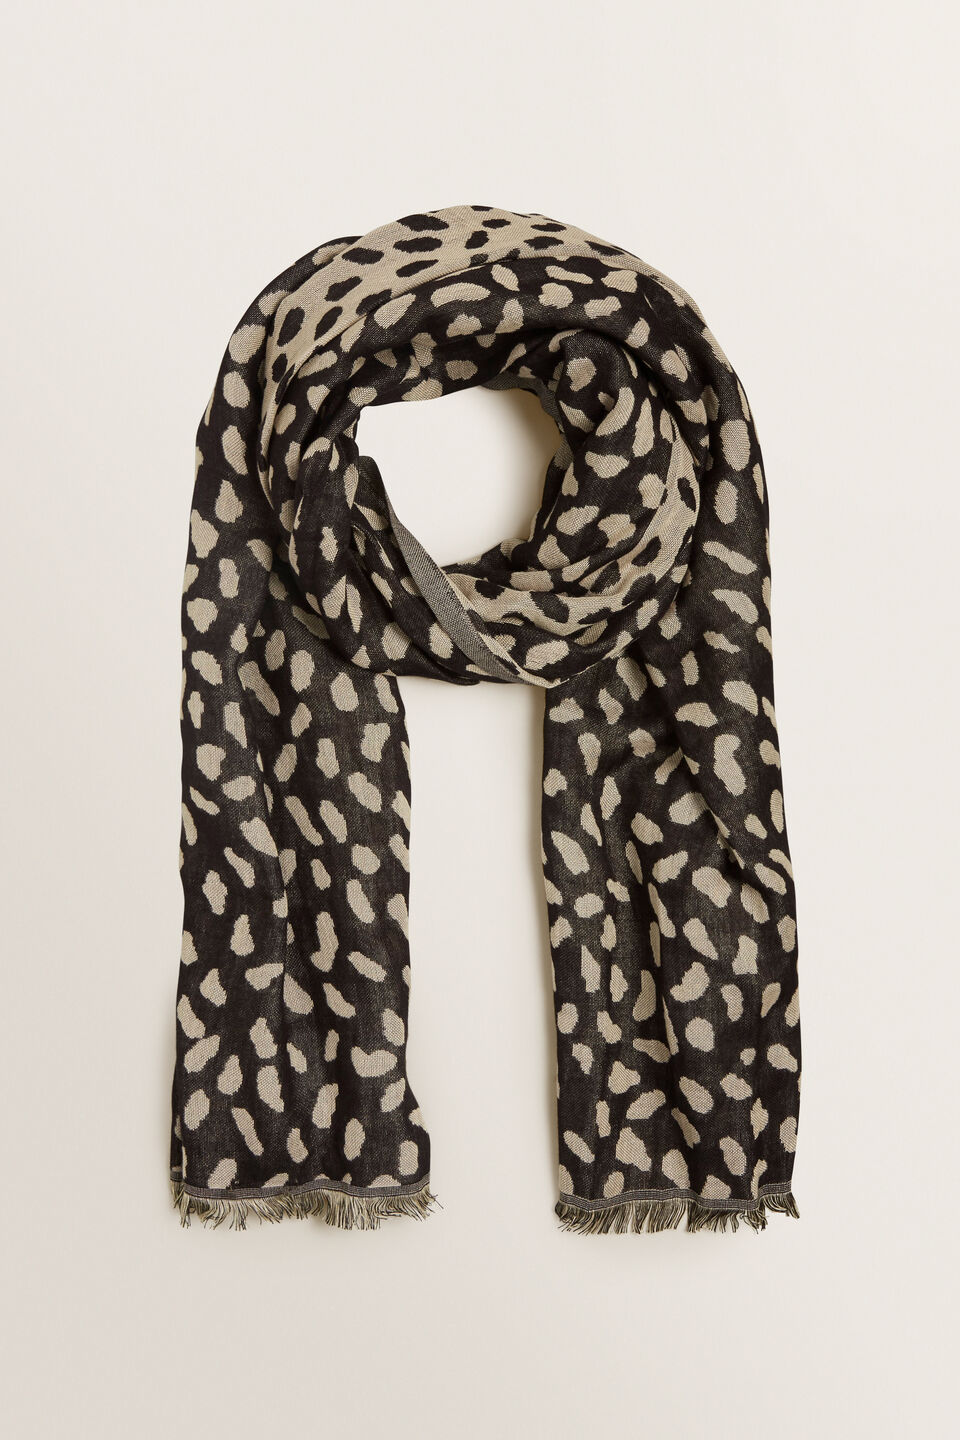 Abstract Spot Jacquard Scarf  